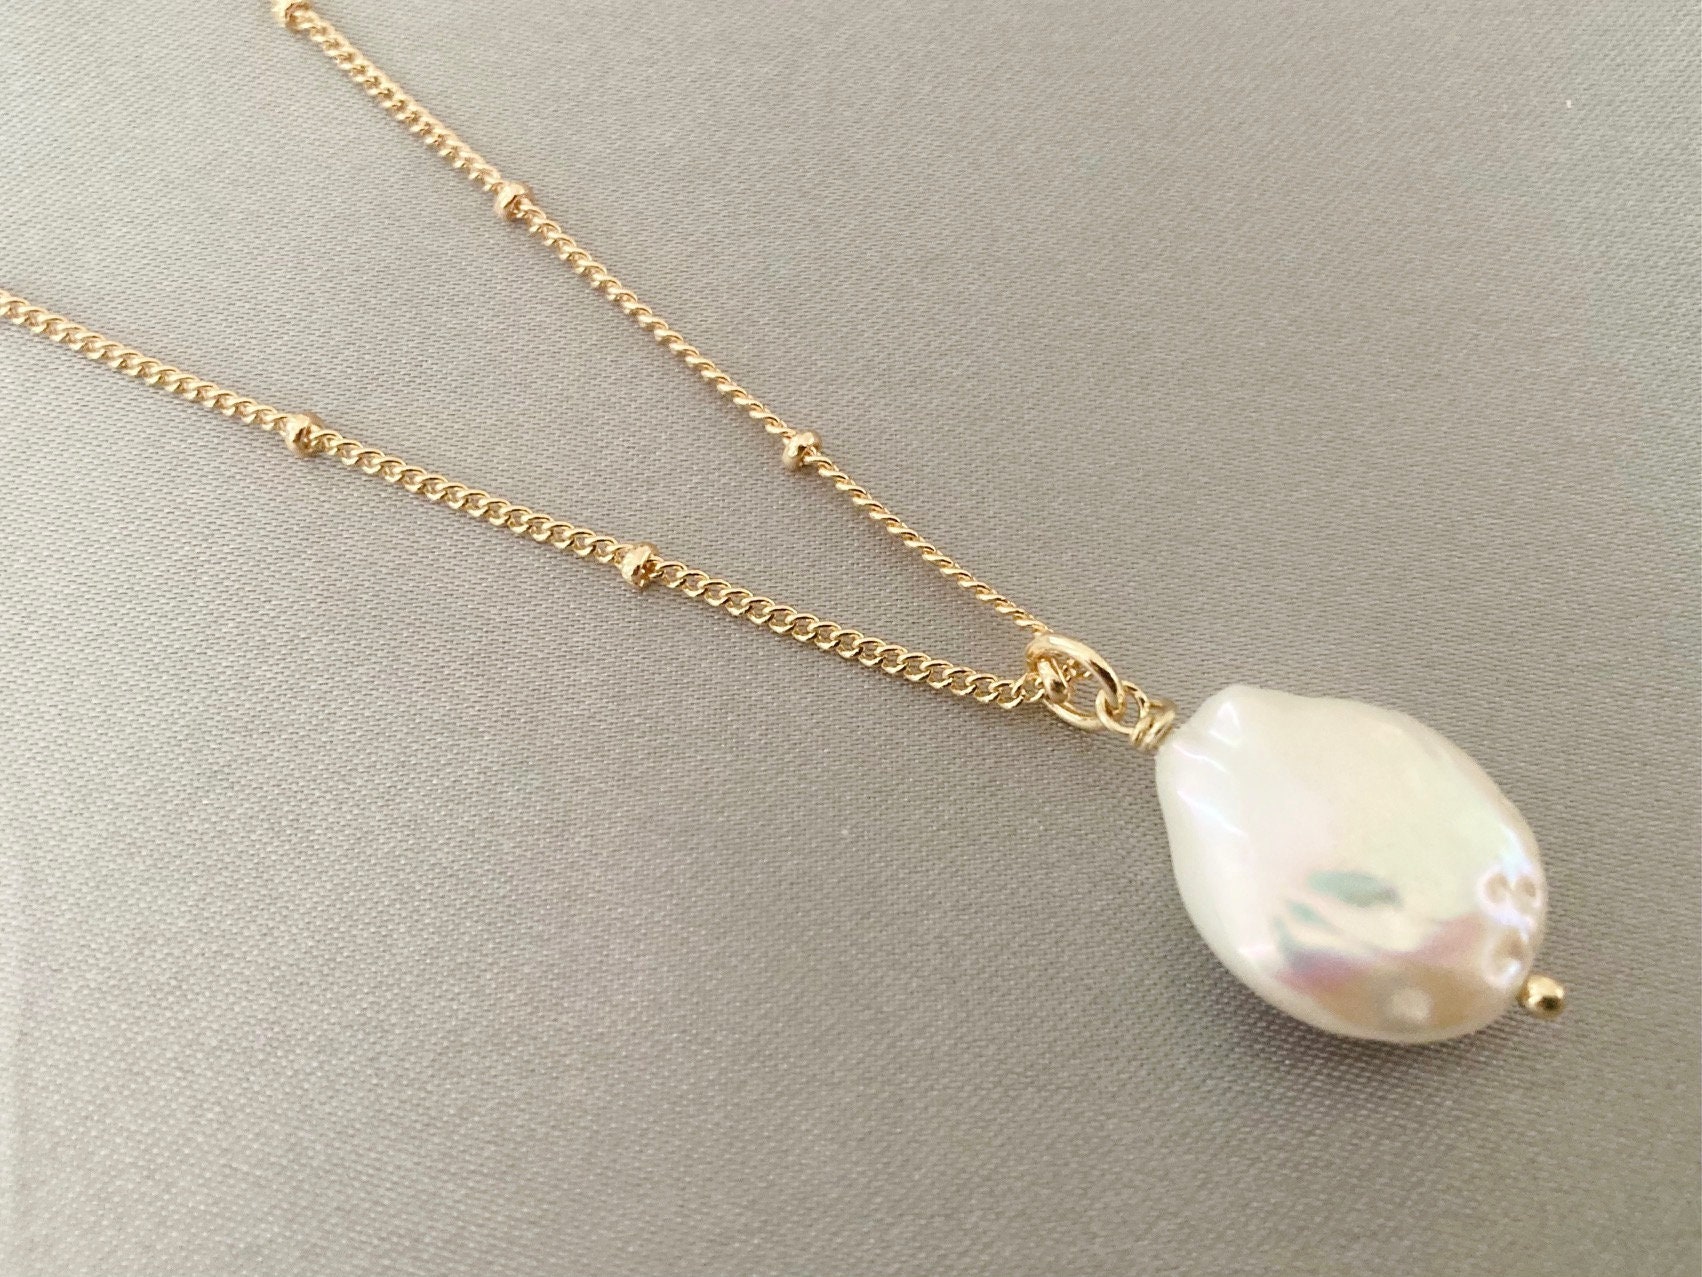 Velatti large baroque Pearl Necklace gold pendant signed made in SPAIN ...